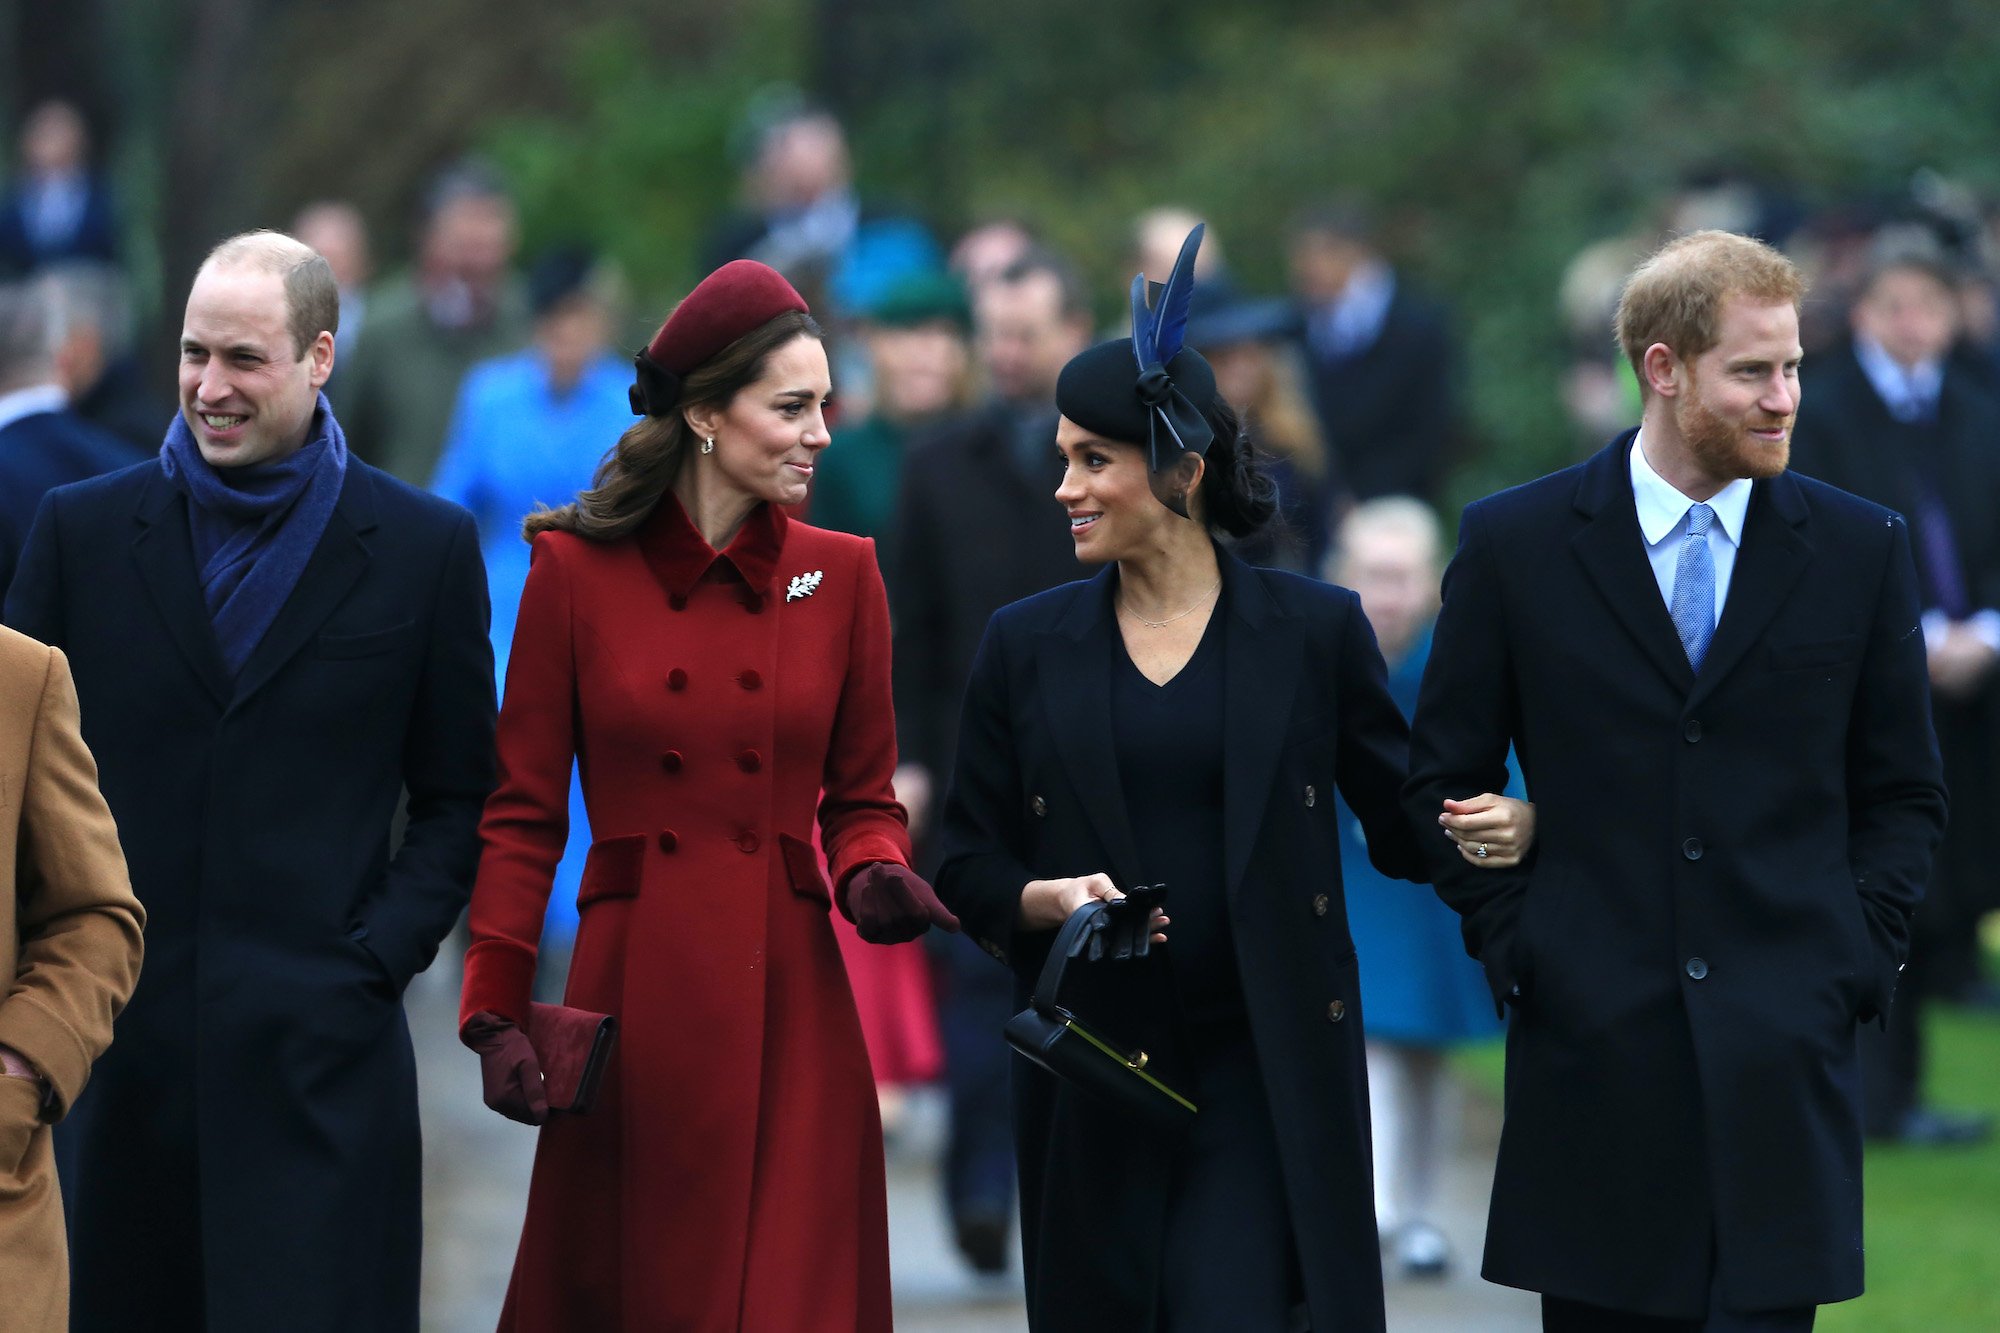 The Royal Family members (L-R) Prince William, Kate Middleton, Meghan Markle, and Prince Harry walking